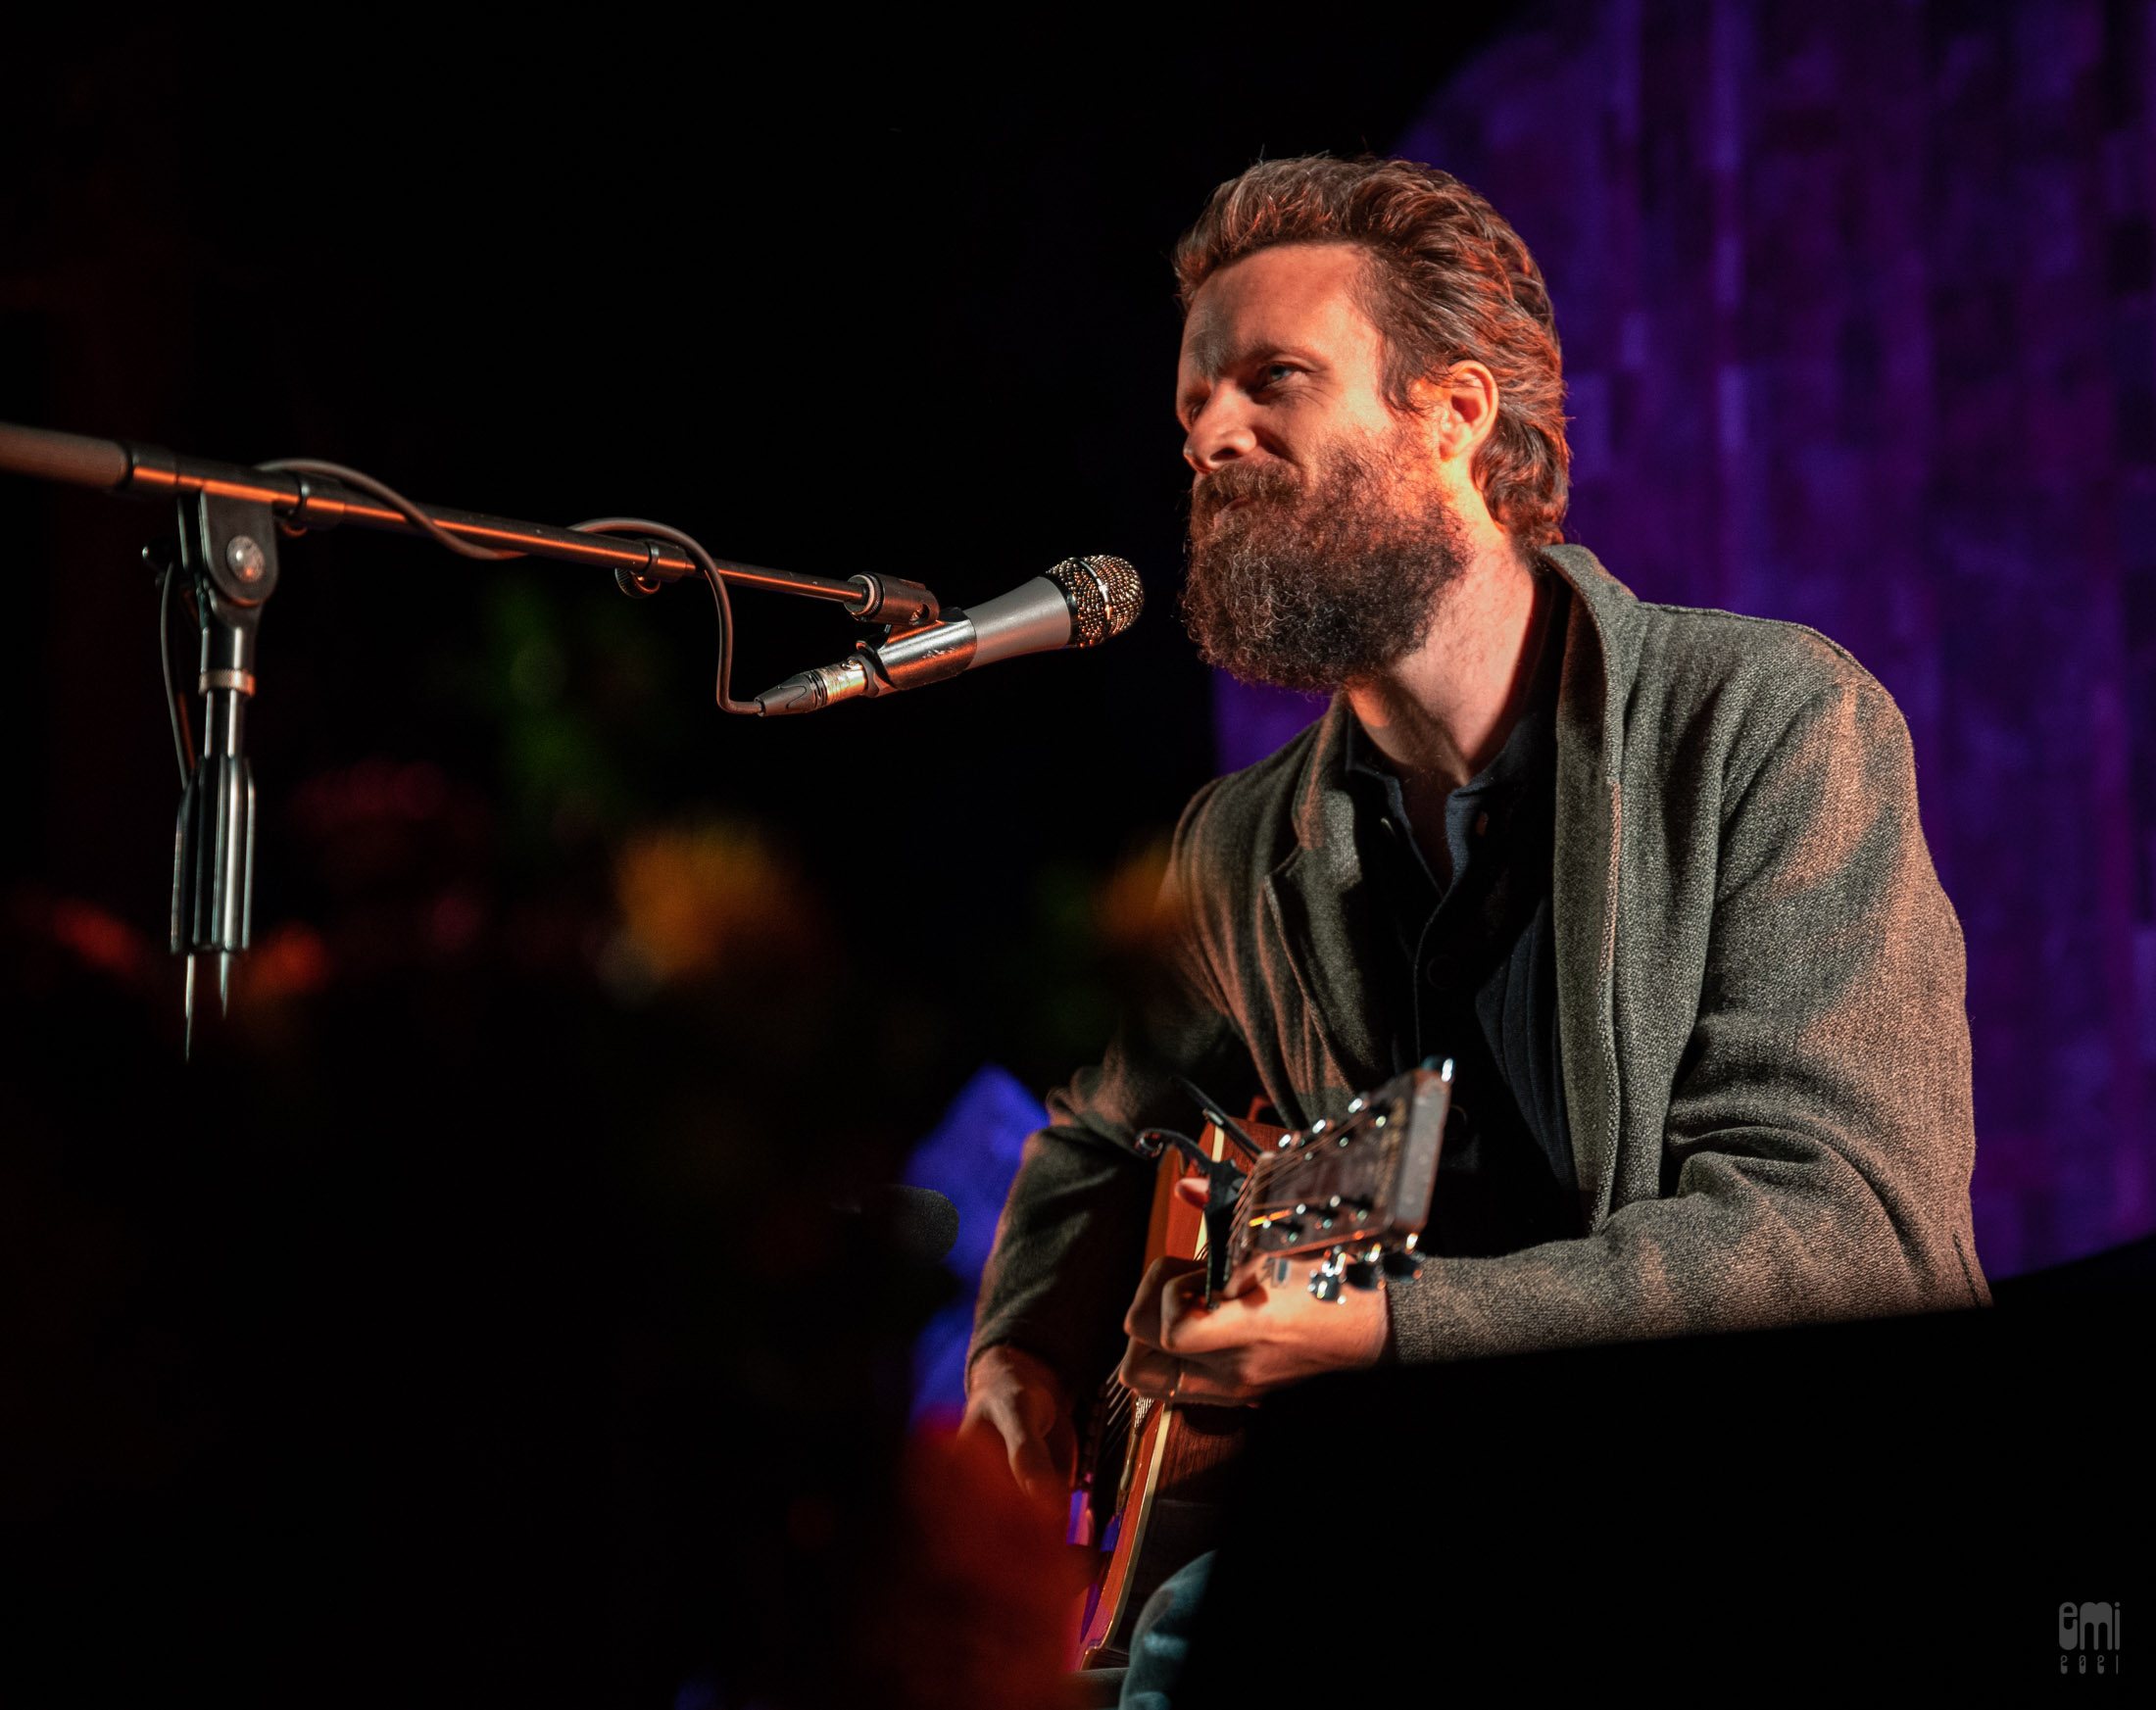 20211010 FATHER JOHN MISTY at Henry Miller Memorial Library, HMML, BIG SUR, photo by emi